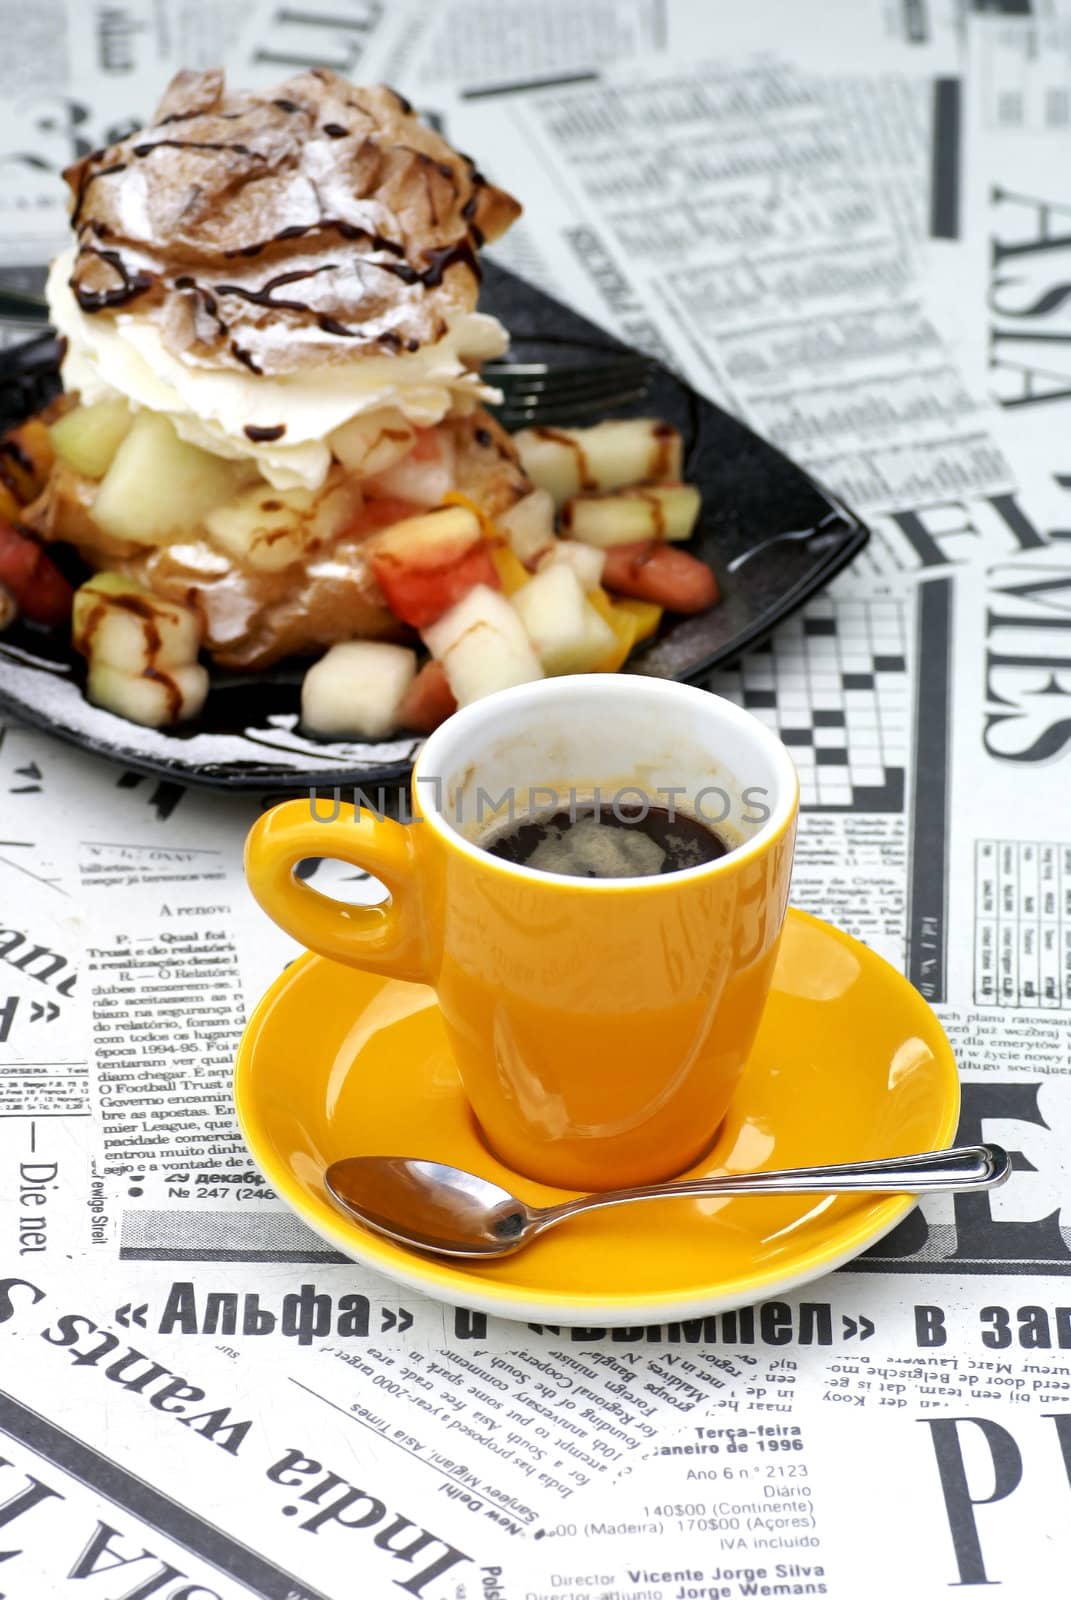 A cup of coffee in front of some confectionery, standing on a 'newspaper table'.